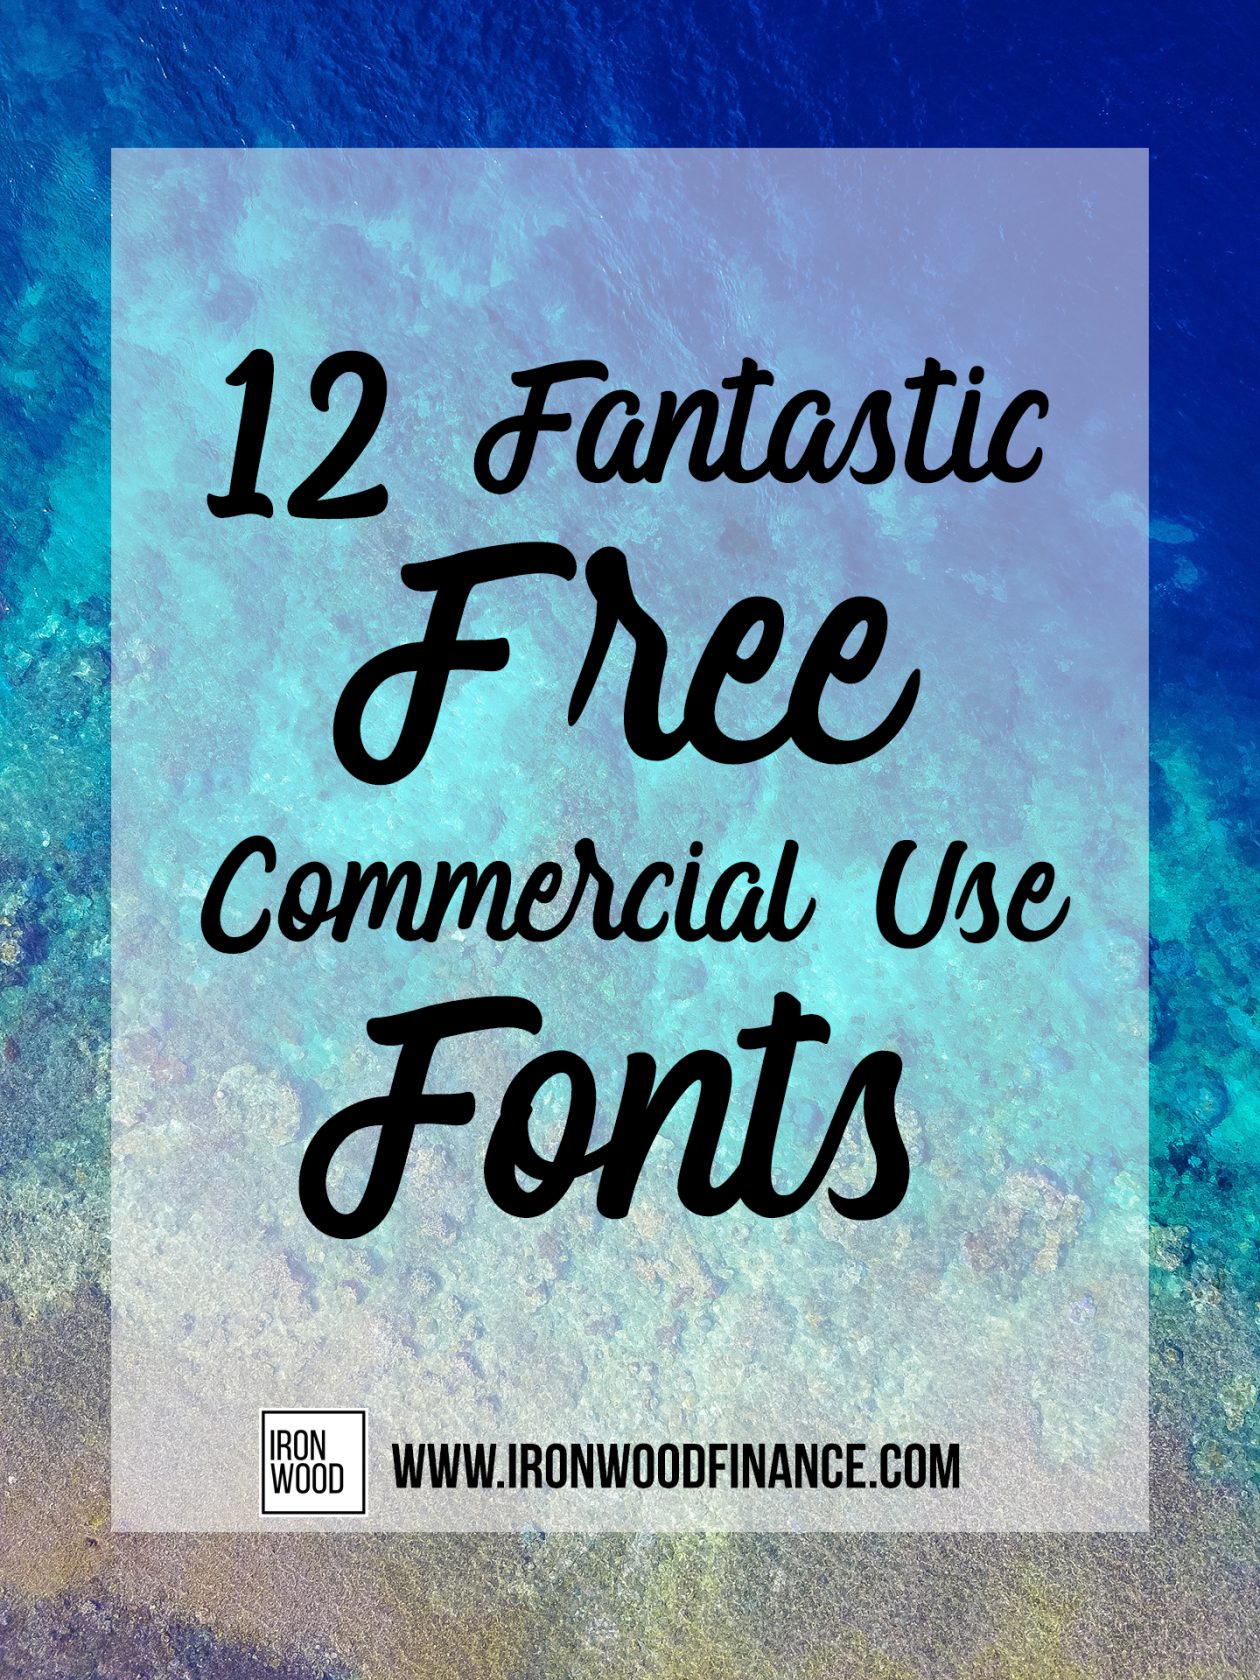 Free Commercial Use Fonts 12 Great Typefaces For Small Business